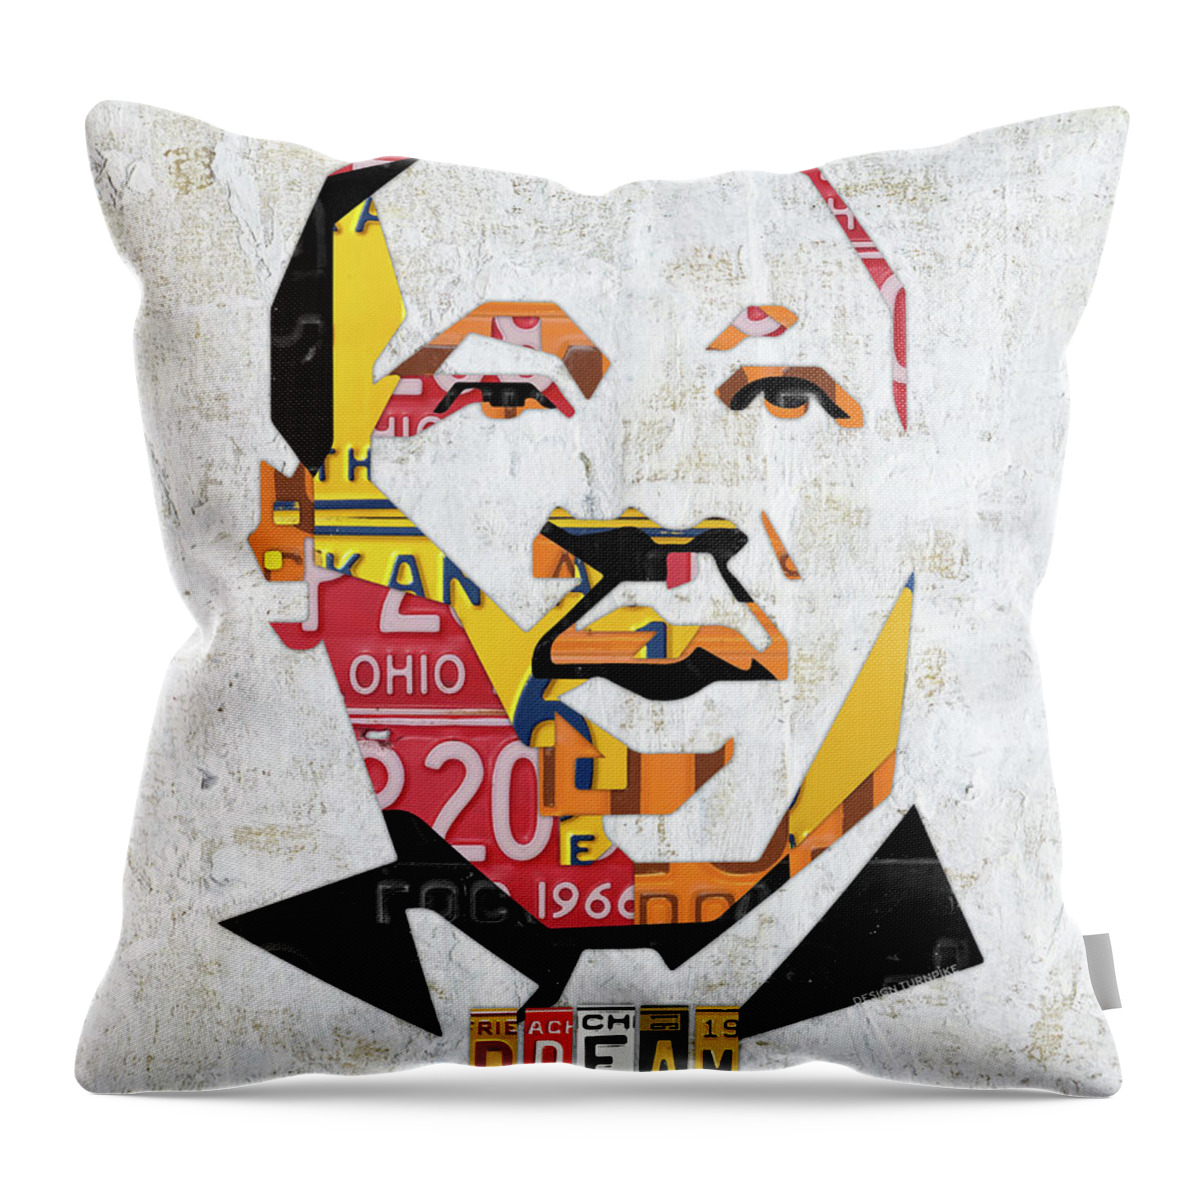 Mlk Throw Pillow featuring the mixed media MLK DREAM Portrait in License Plates by Design Turnpike by Design Turnpike